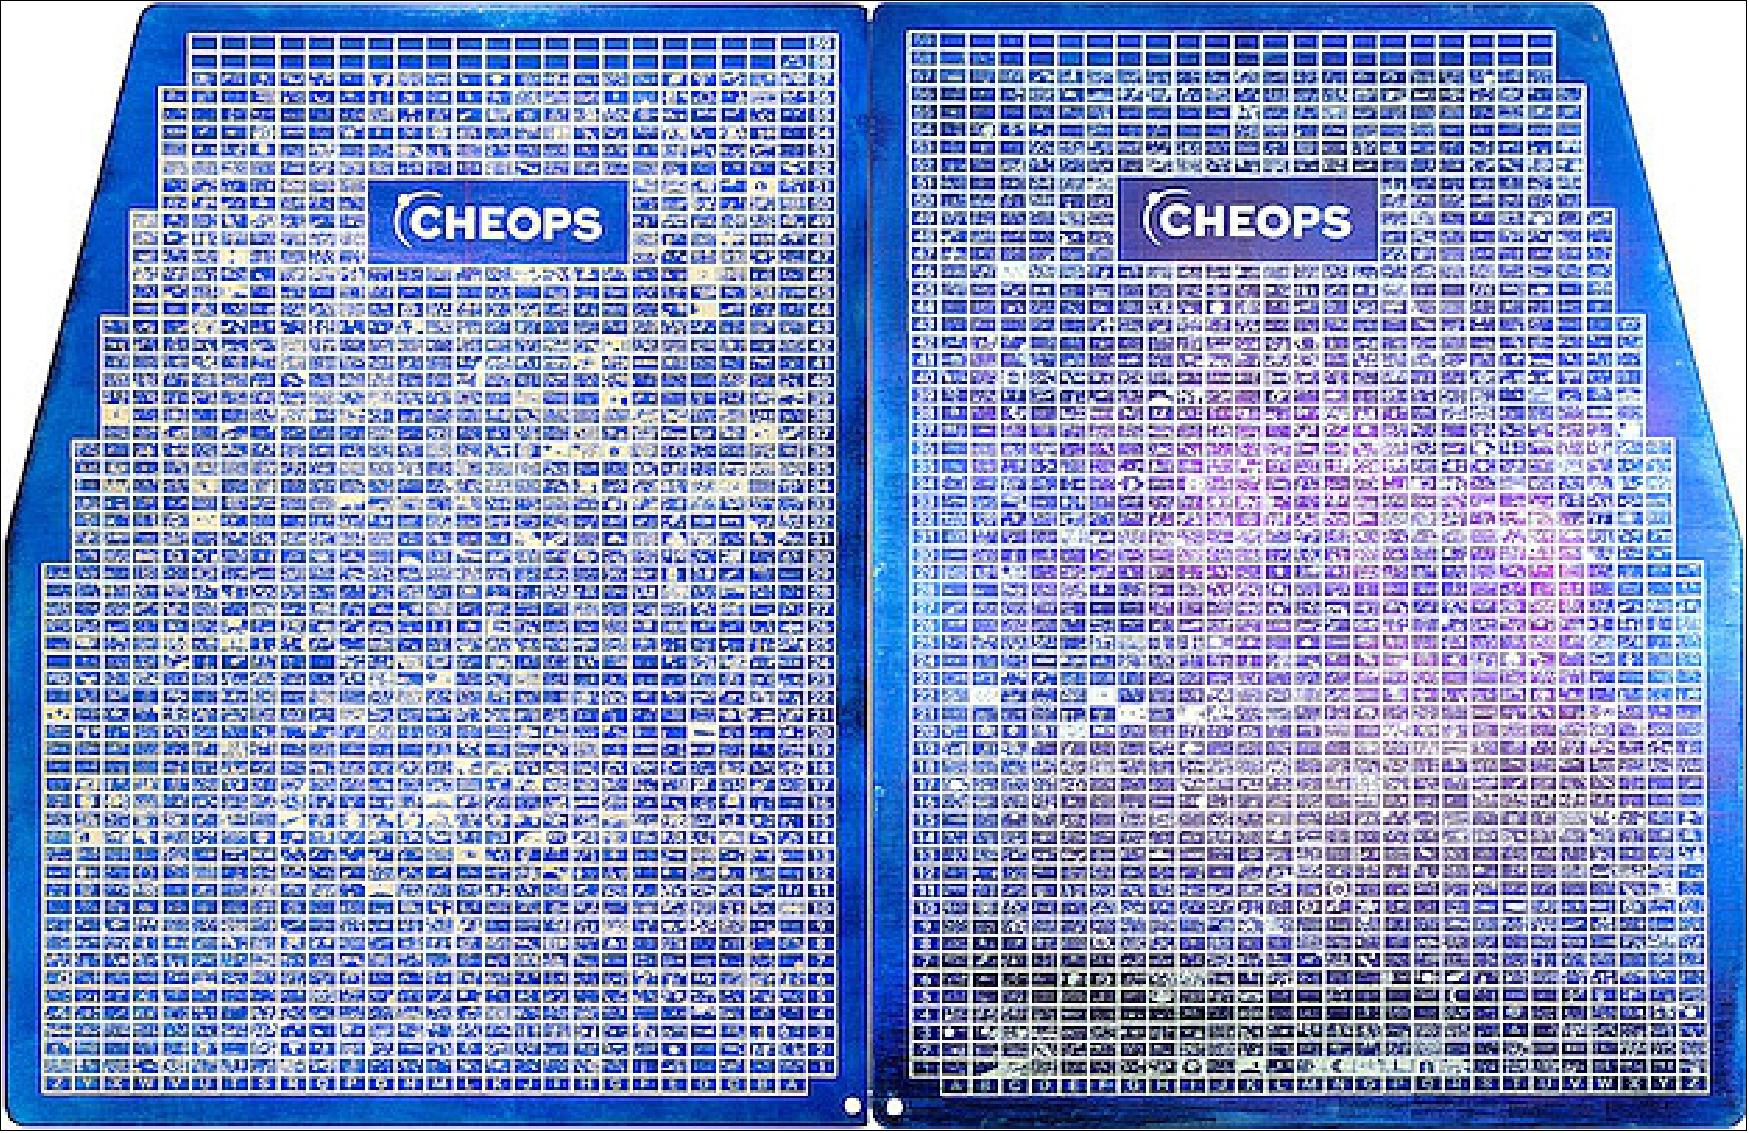 Figure 55: CHEOPS plaques: Two titanium plaques etched with thousands of miniaturized drawings made by children have been fixed to the CHaracterizing ExOPlanets Satellite, CHEOPS. Each plaque measures nearly 18 cm across and 24 cm high (image credit: G. Bucher – Bern University of Applied Sciences)